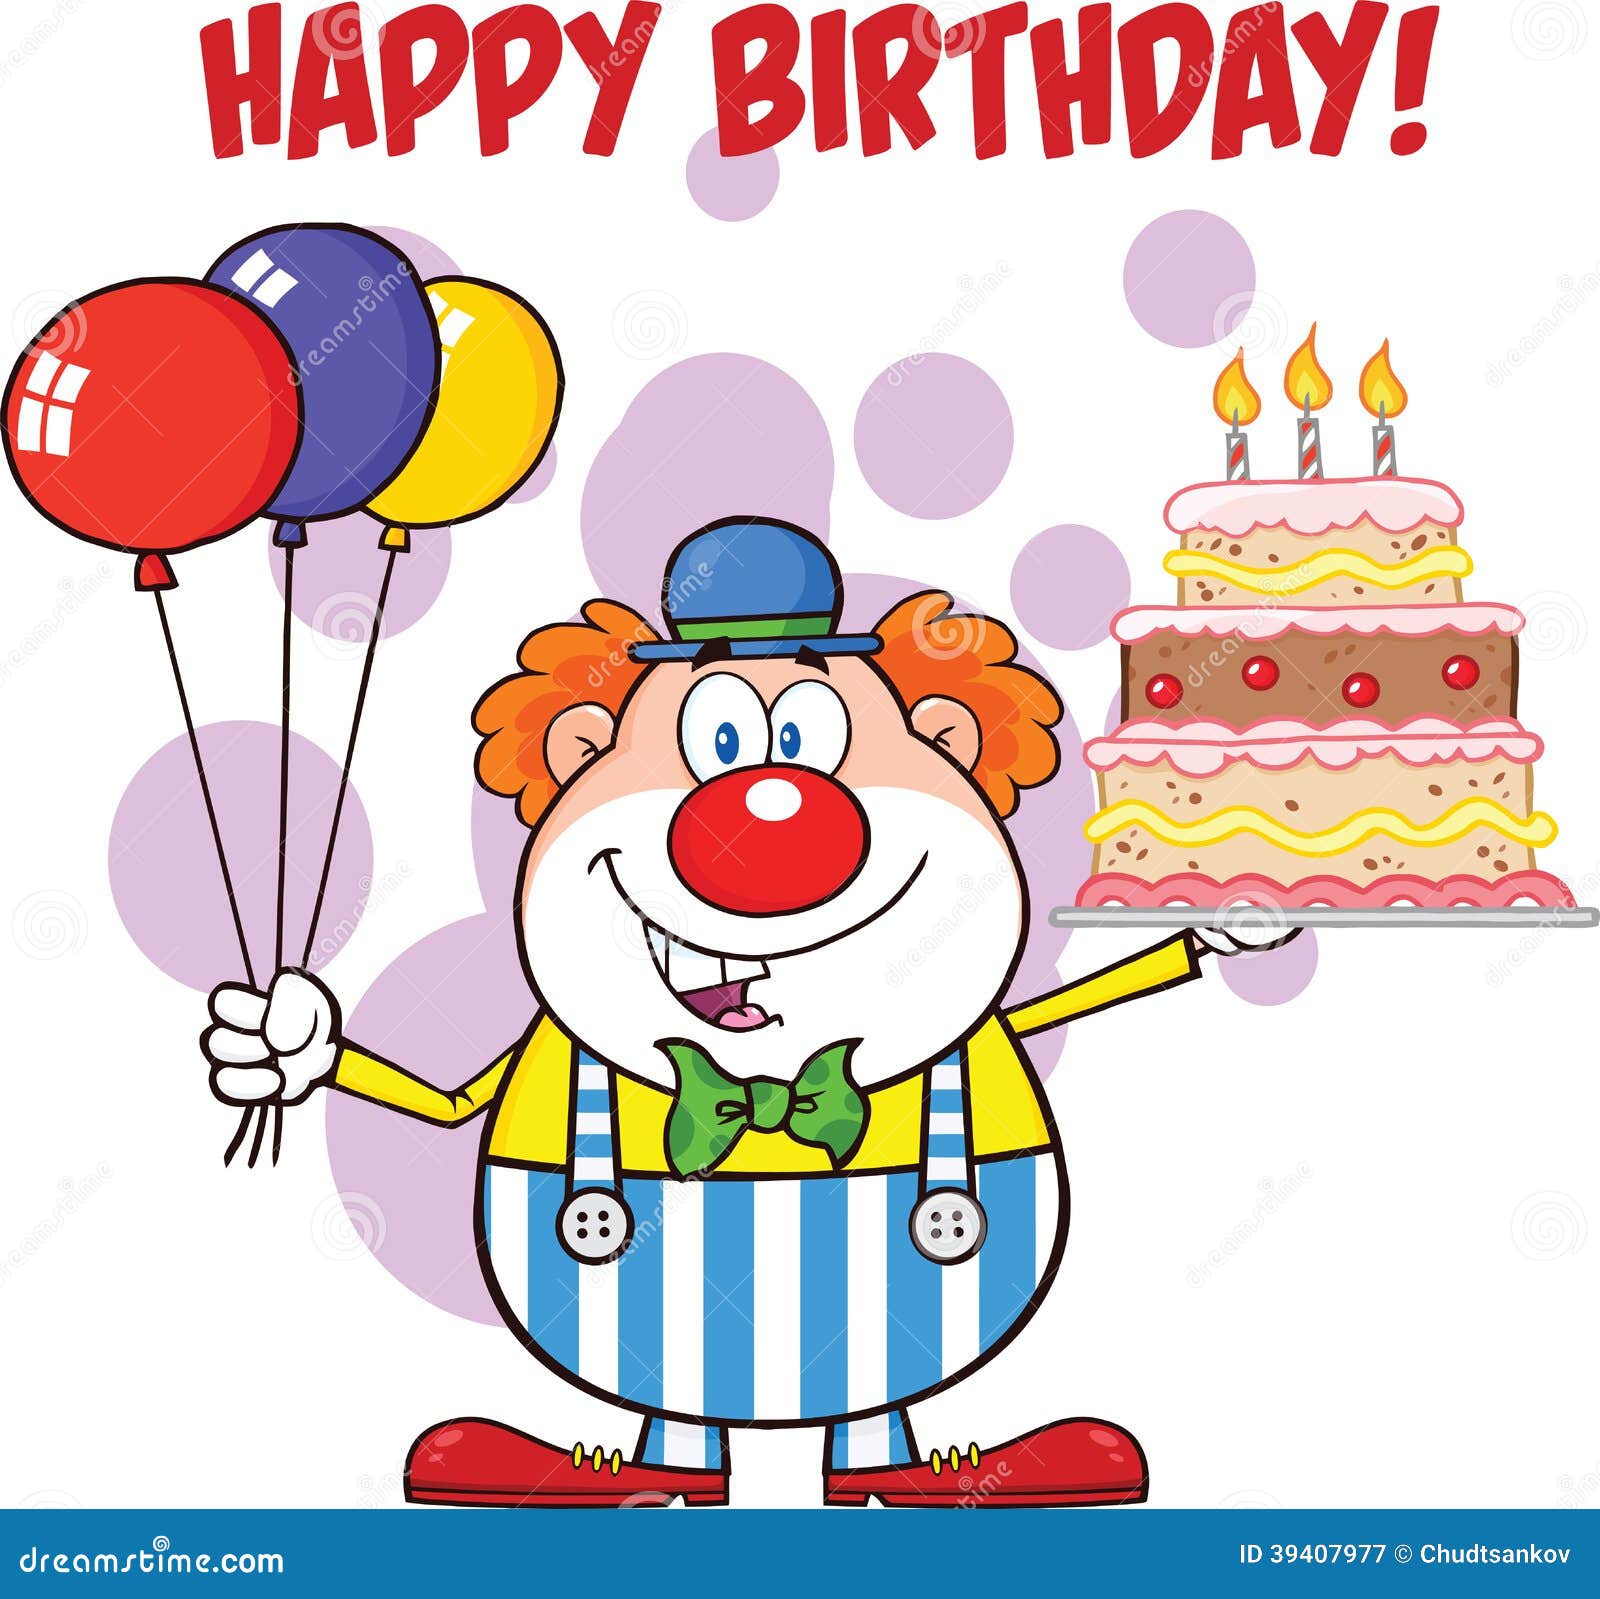 Happy Birthday With Clown Cartoon Character With Balloons And Cake With